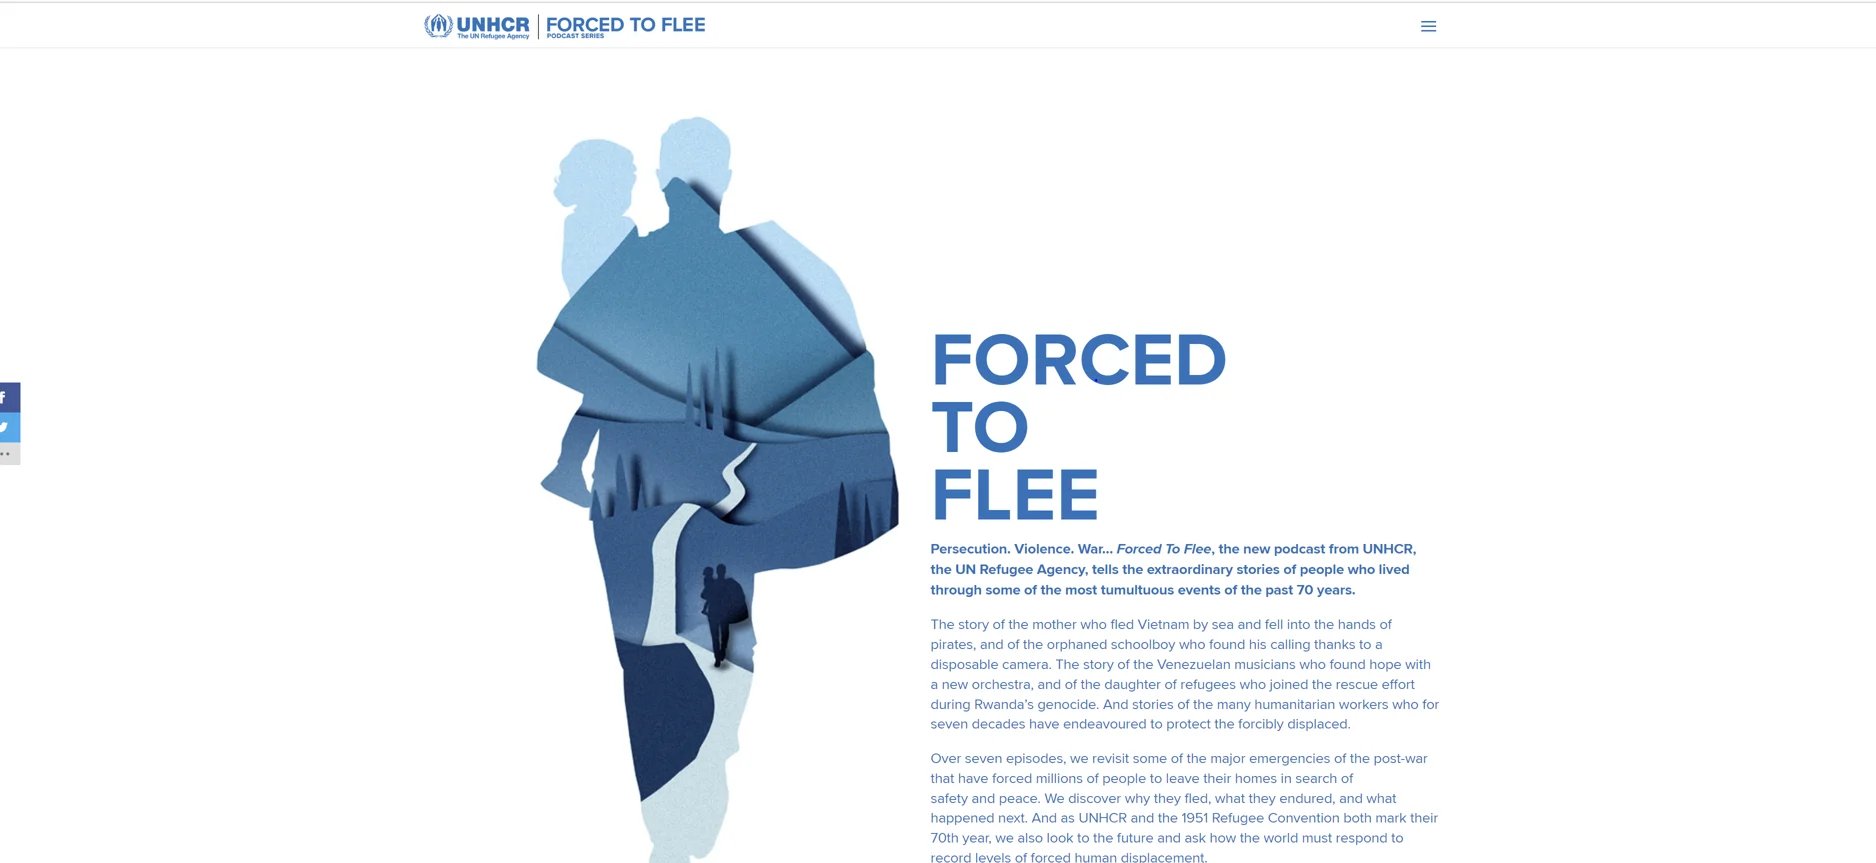 The UN Refugee Agency's podcast "Forced to Flee" is a content marketing example